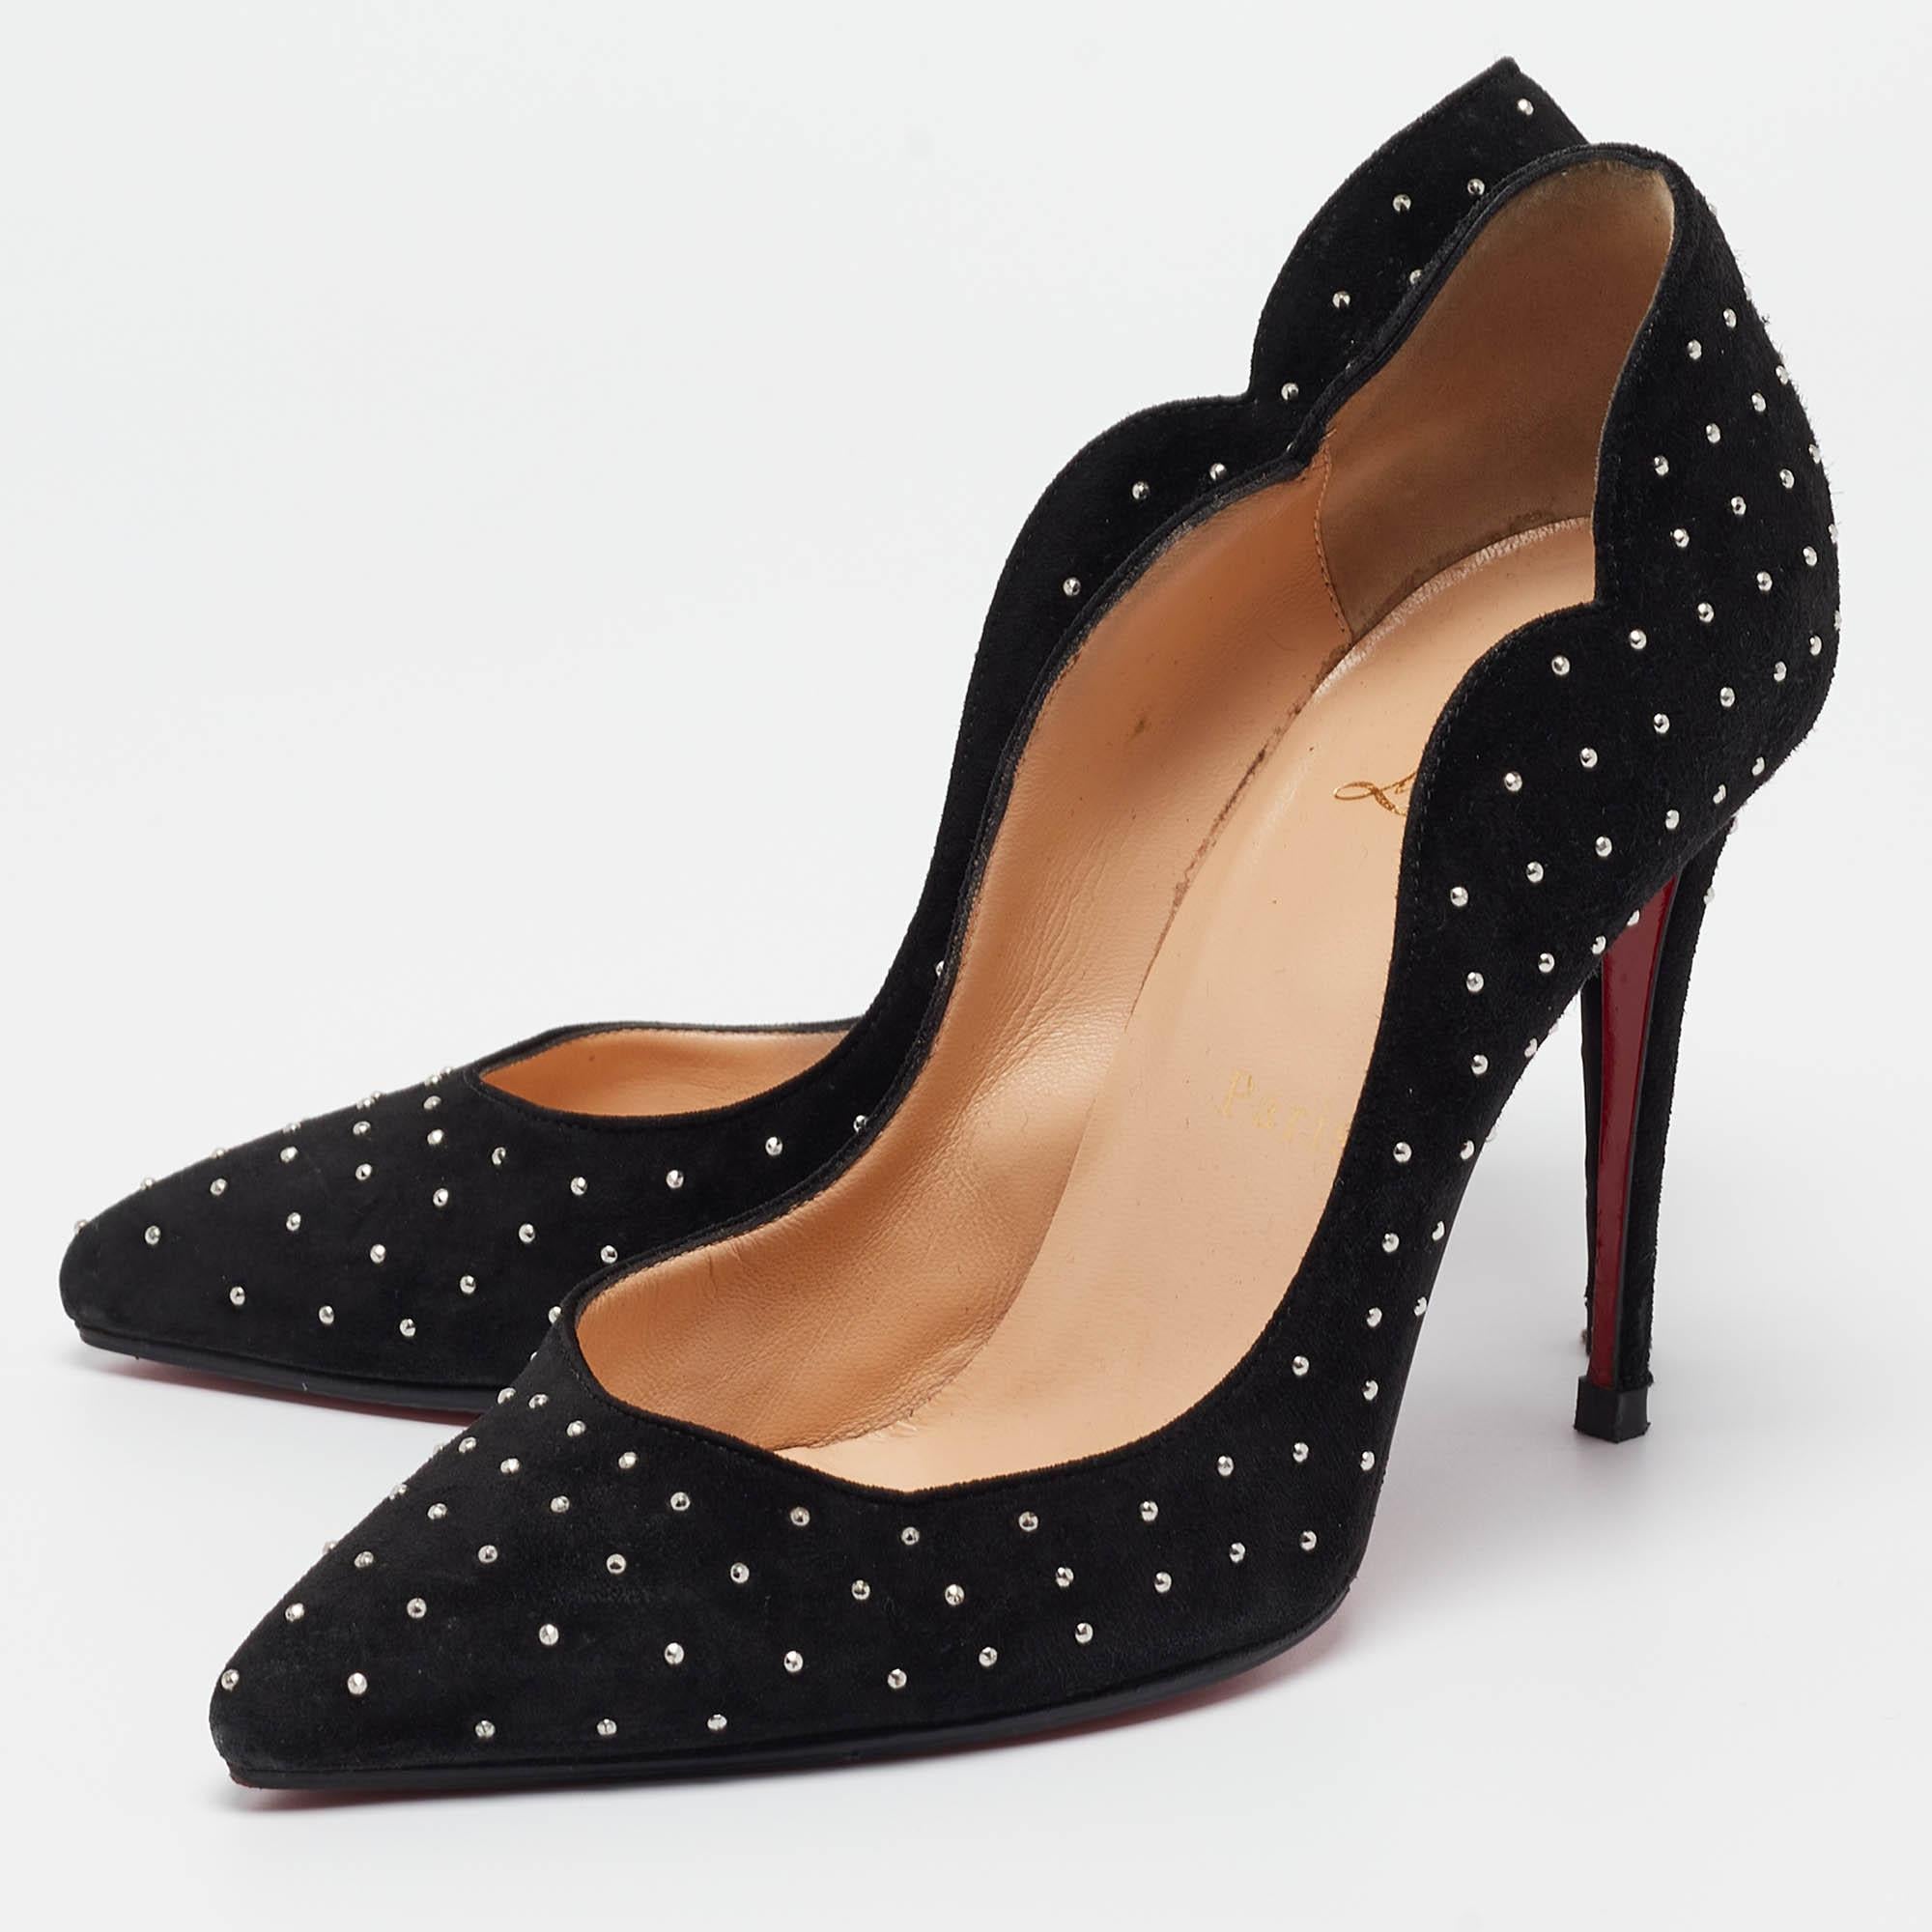 Christian Louboutin Black Studded Suede Hot Chick Pumps Size 36 For Sale 2